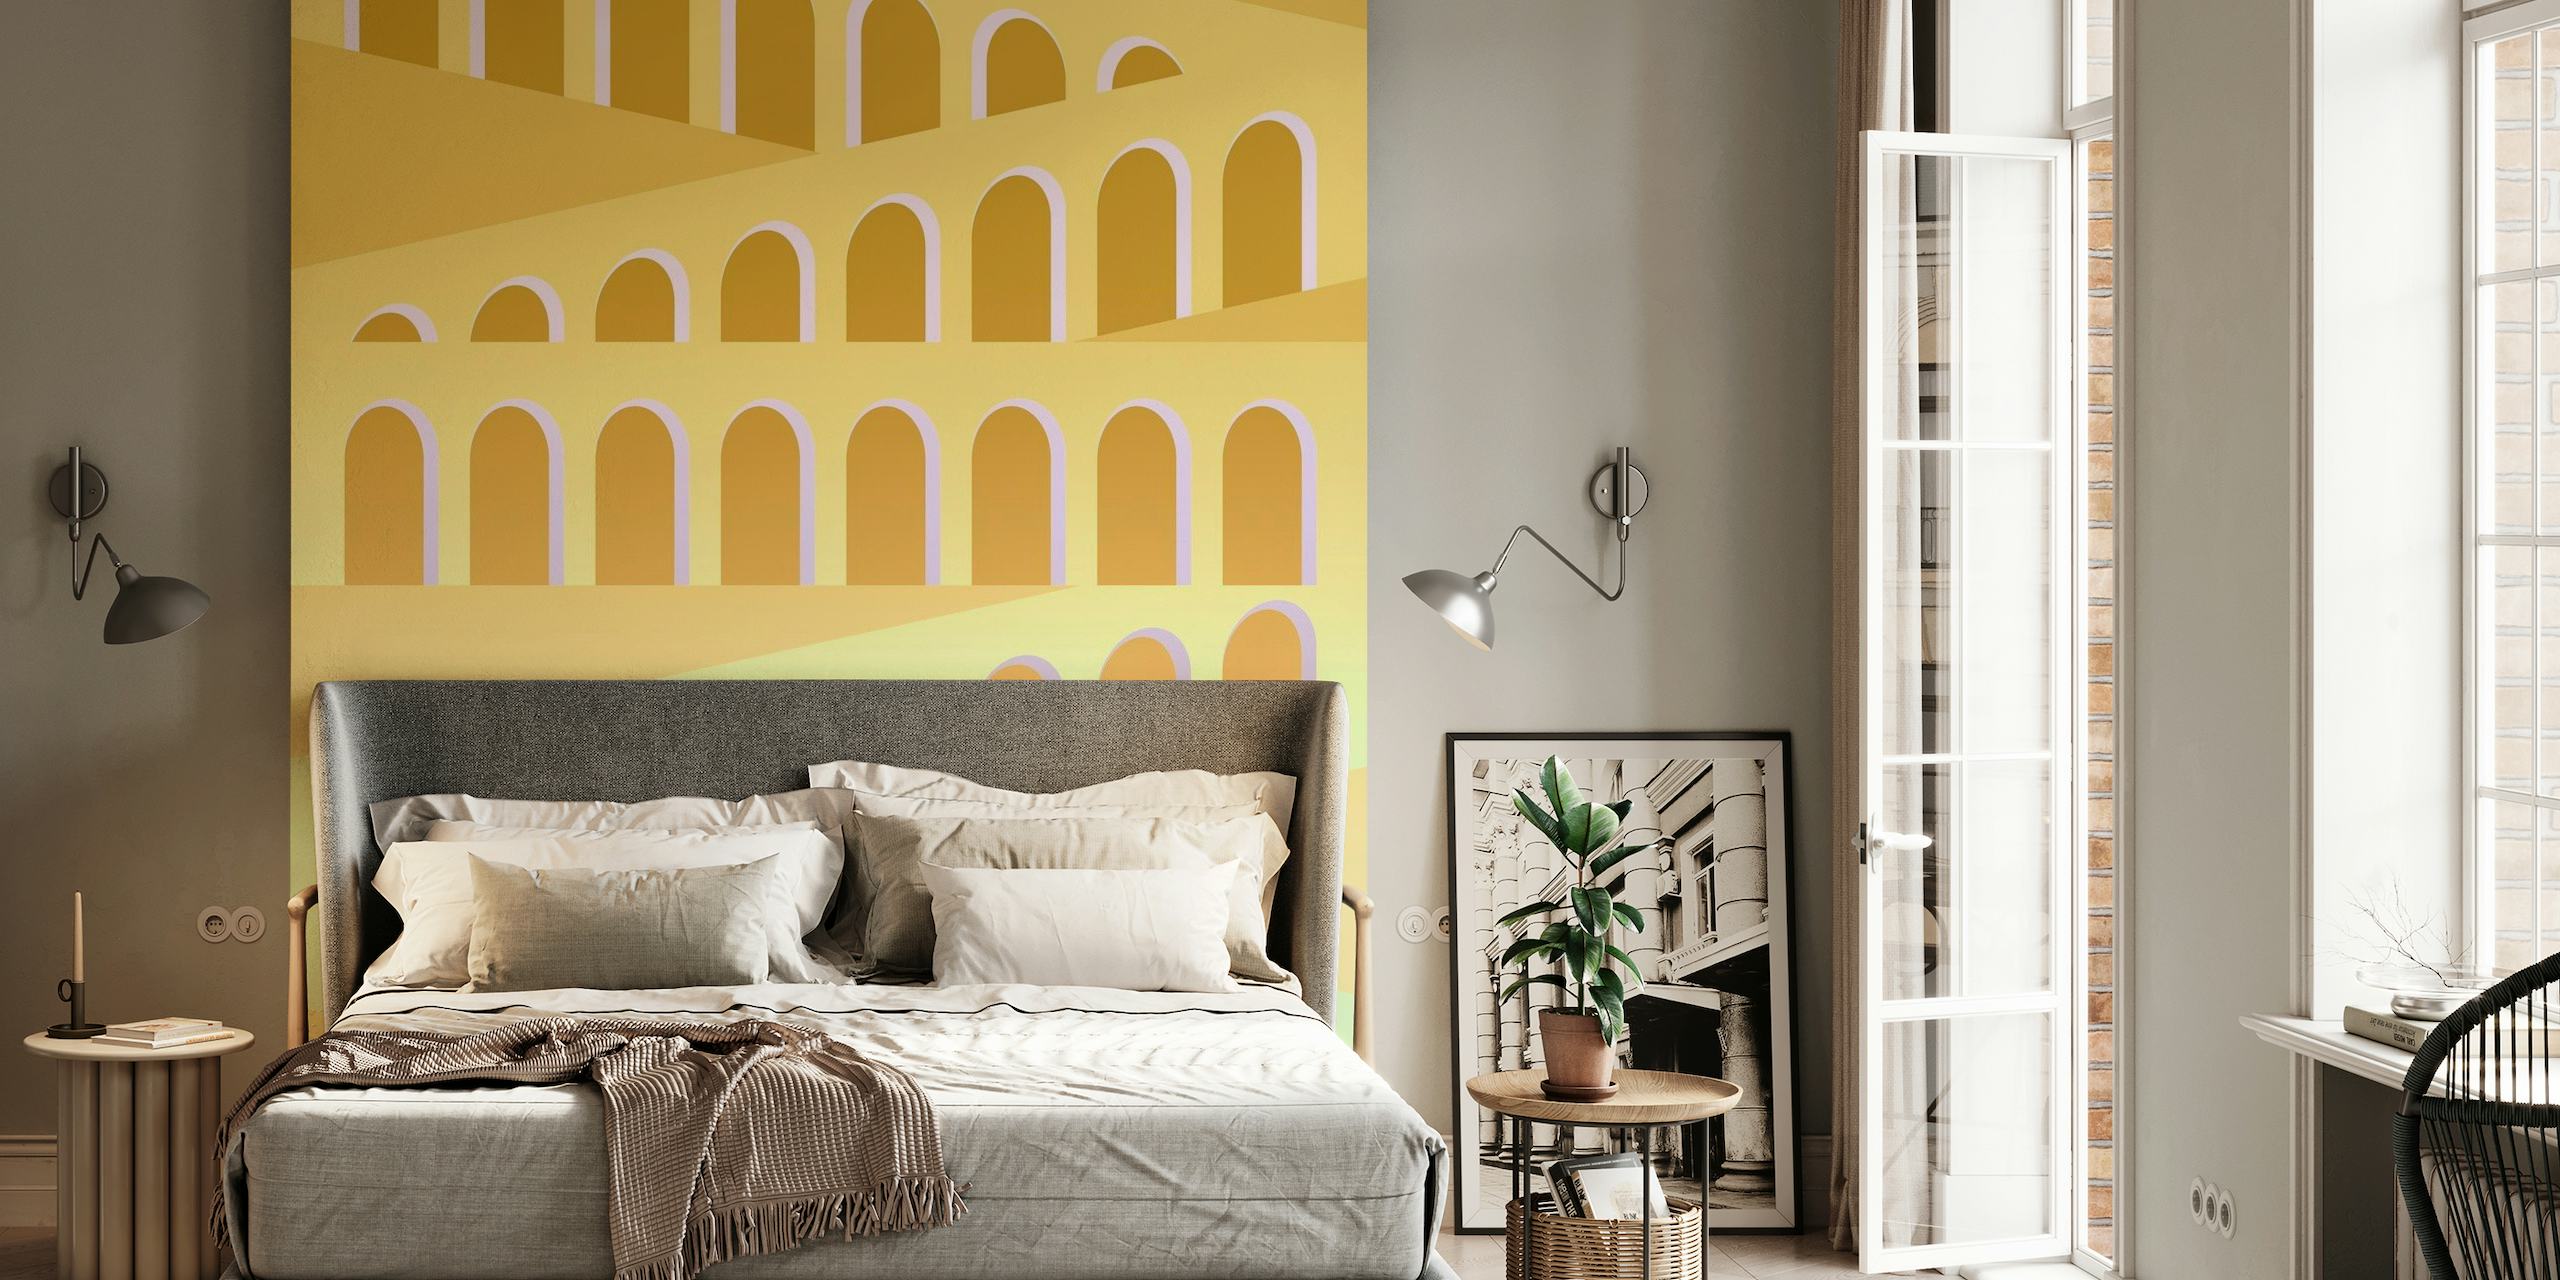 Italian Arches wall mural with warm earthy tones and Mediterranean architectural design